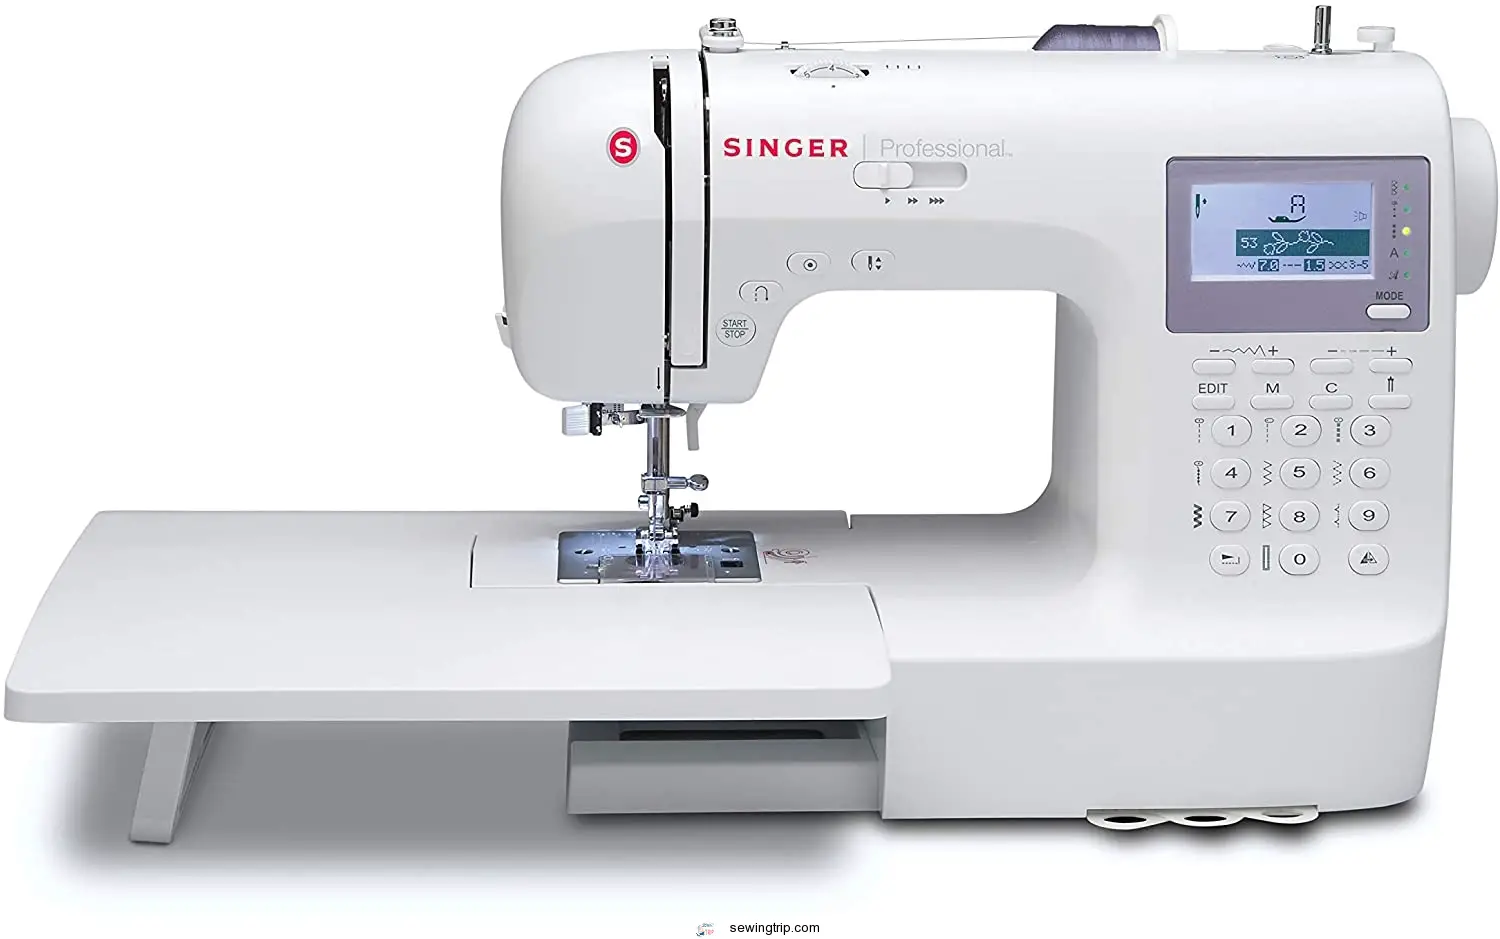 SINGER | Professional Computerized Sewing